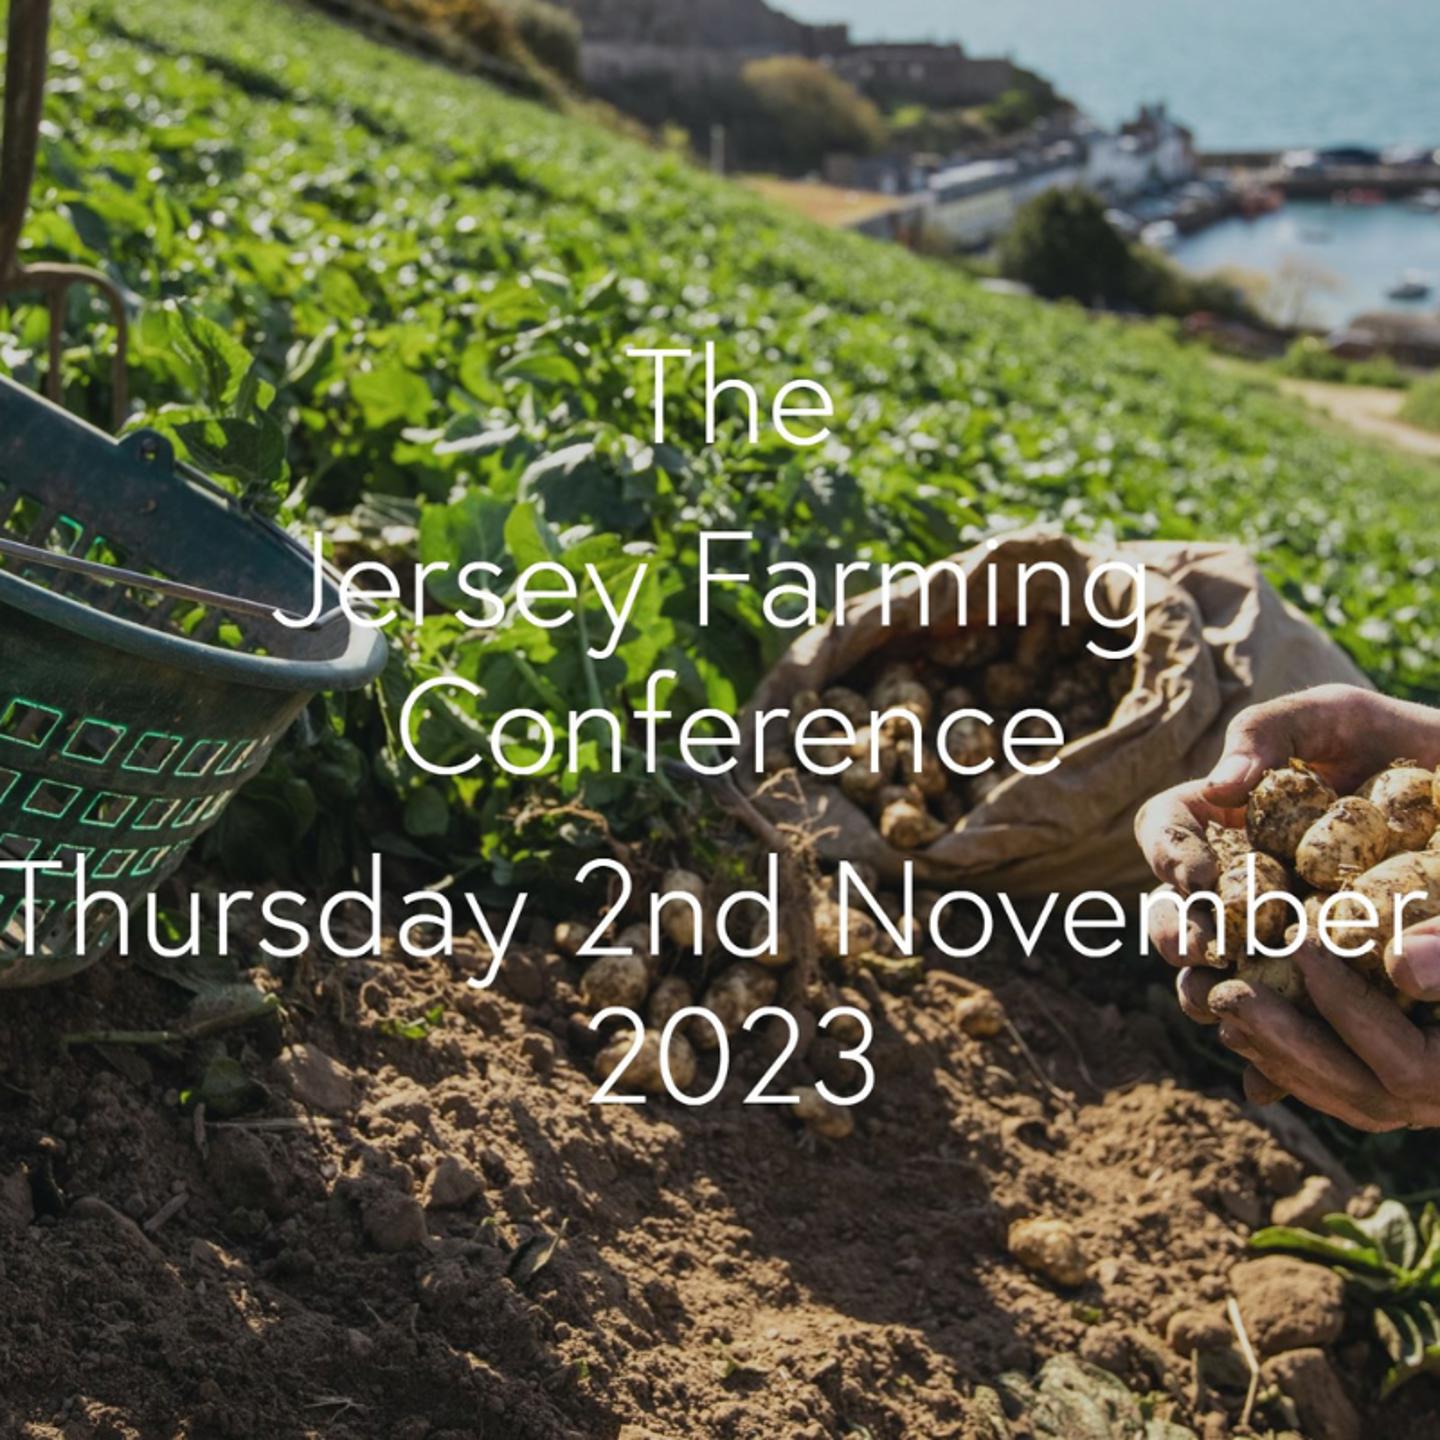 The Jersy Farming Conference 2023